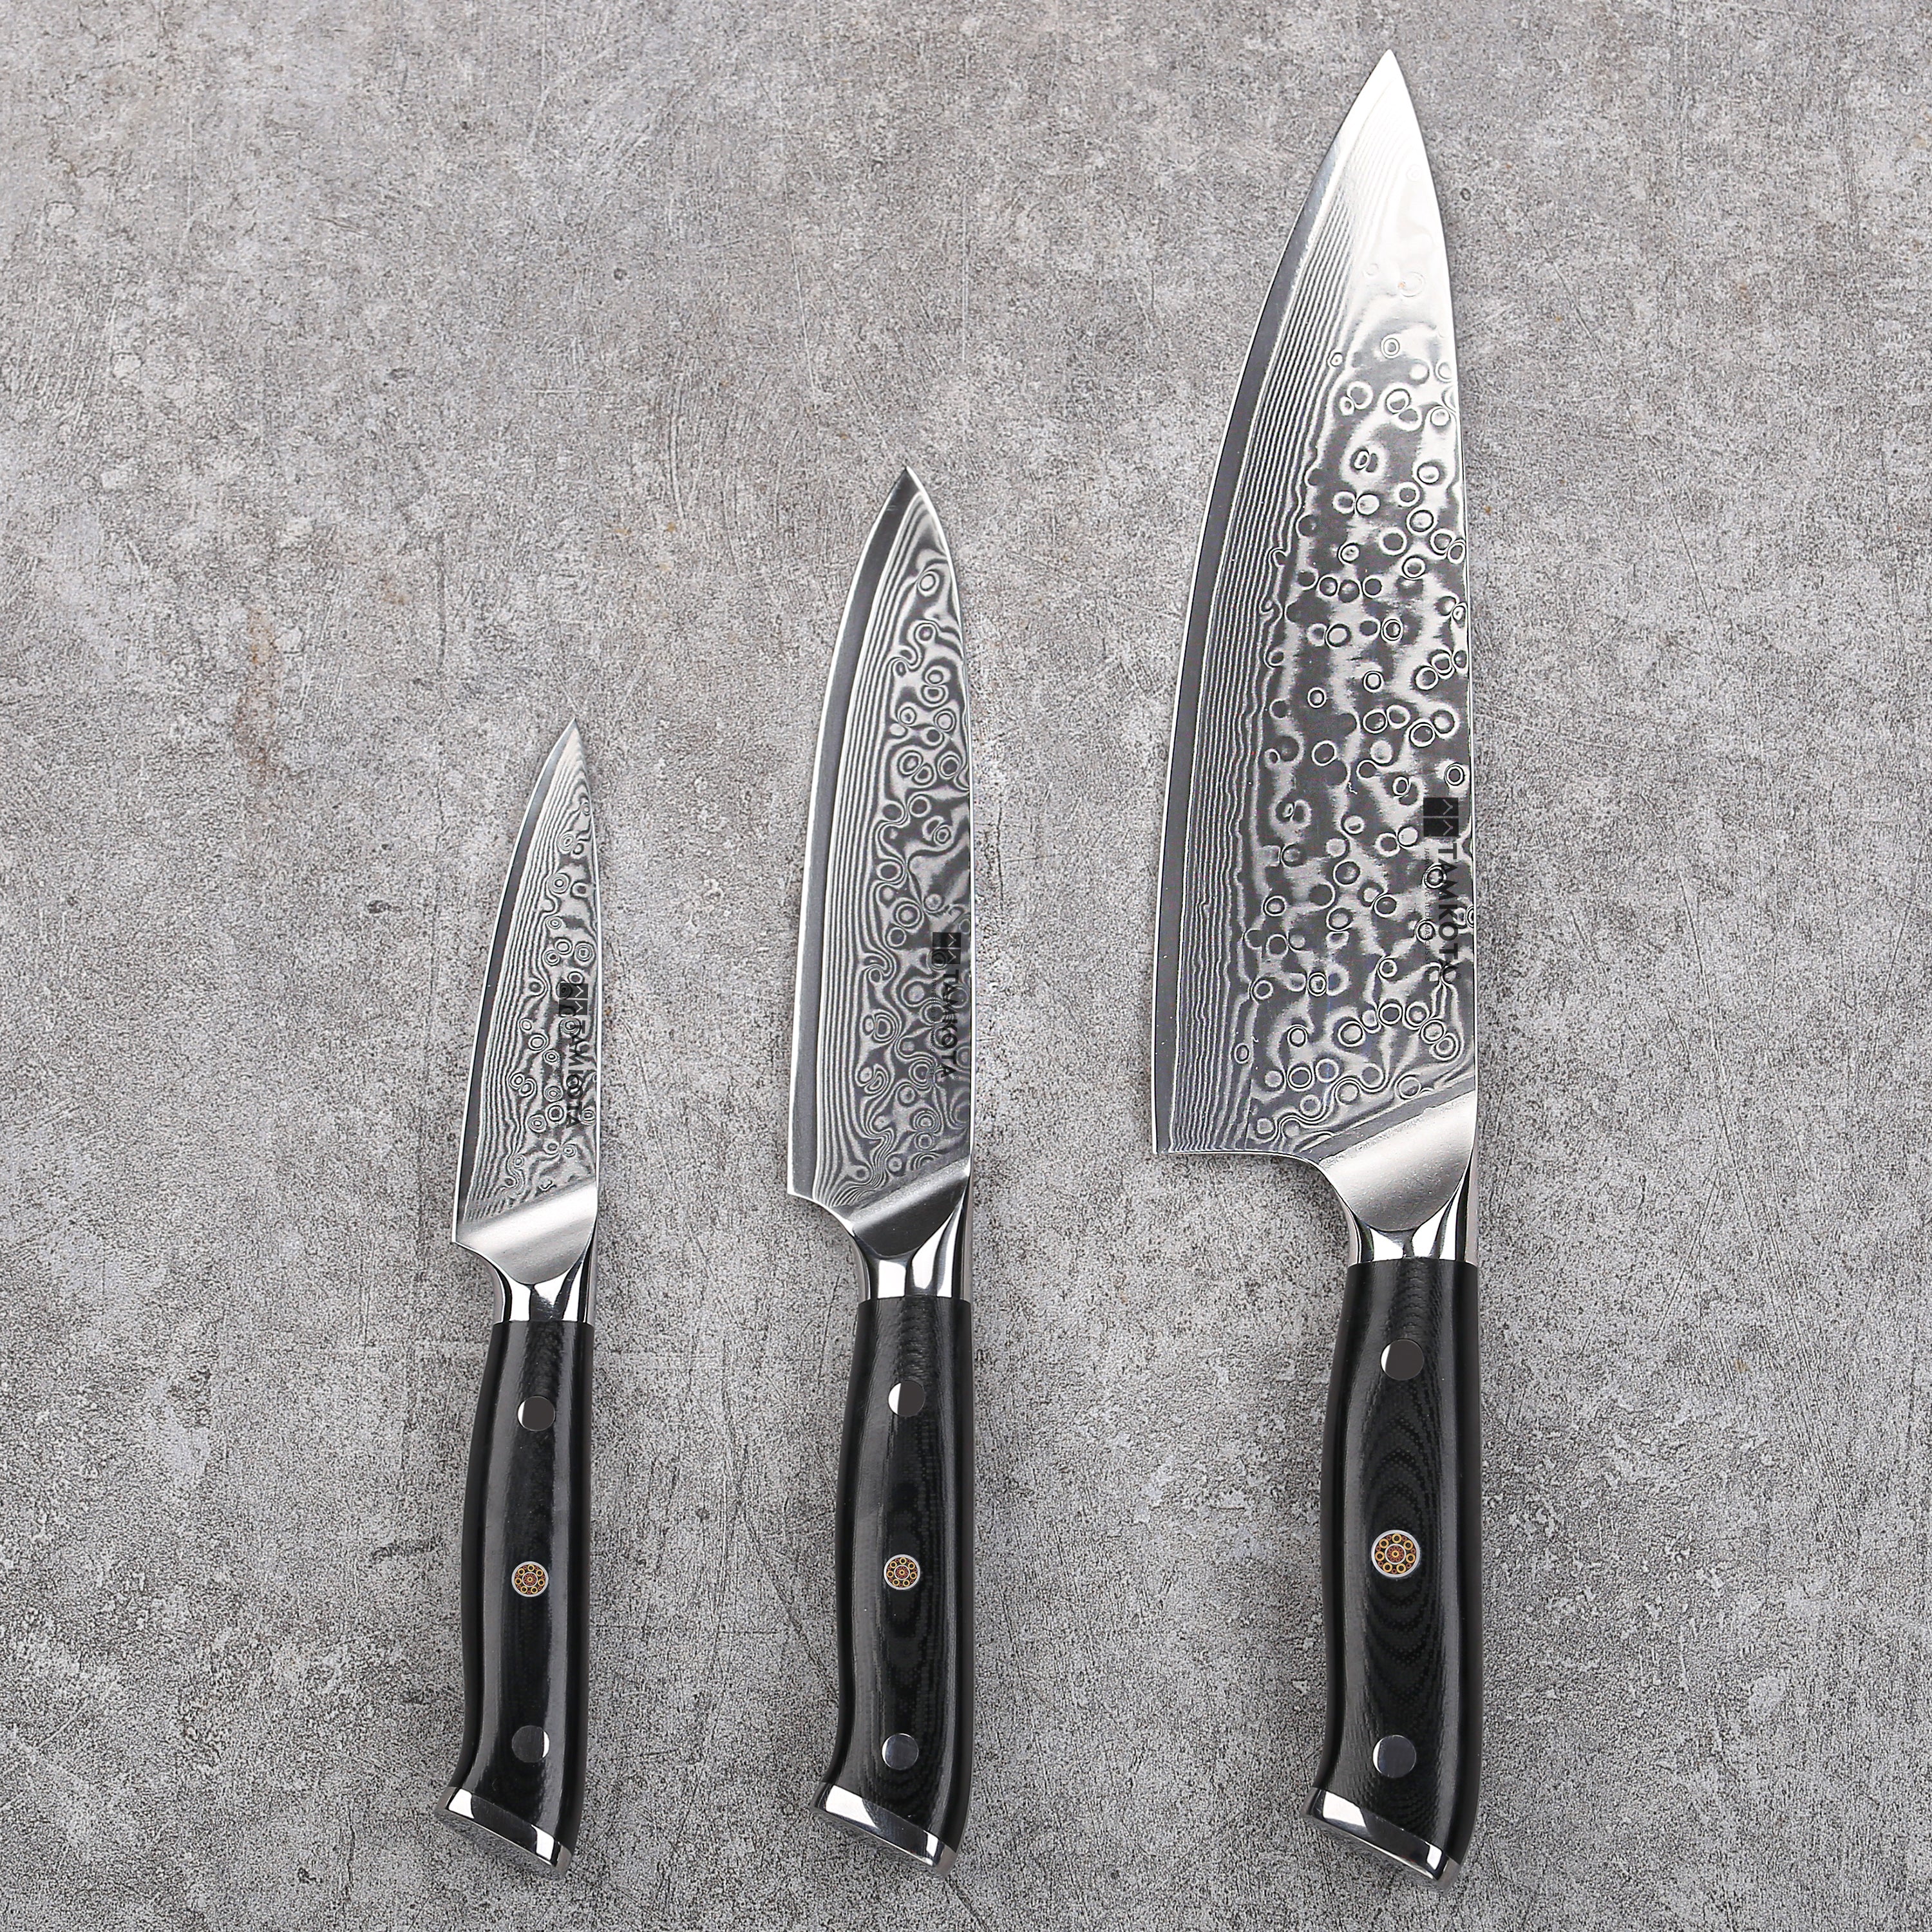 Blackstone 3-Piece Knife Set with Chef's Knife, Paring Knife, and Prep Knife